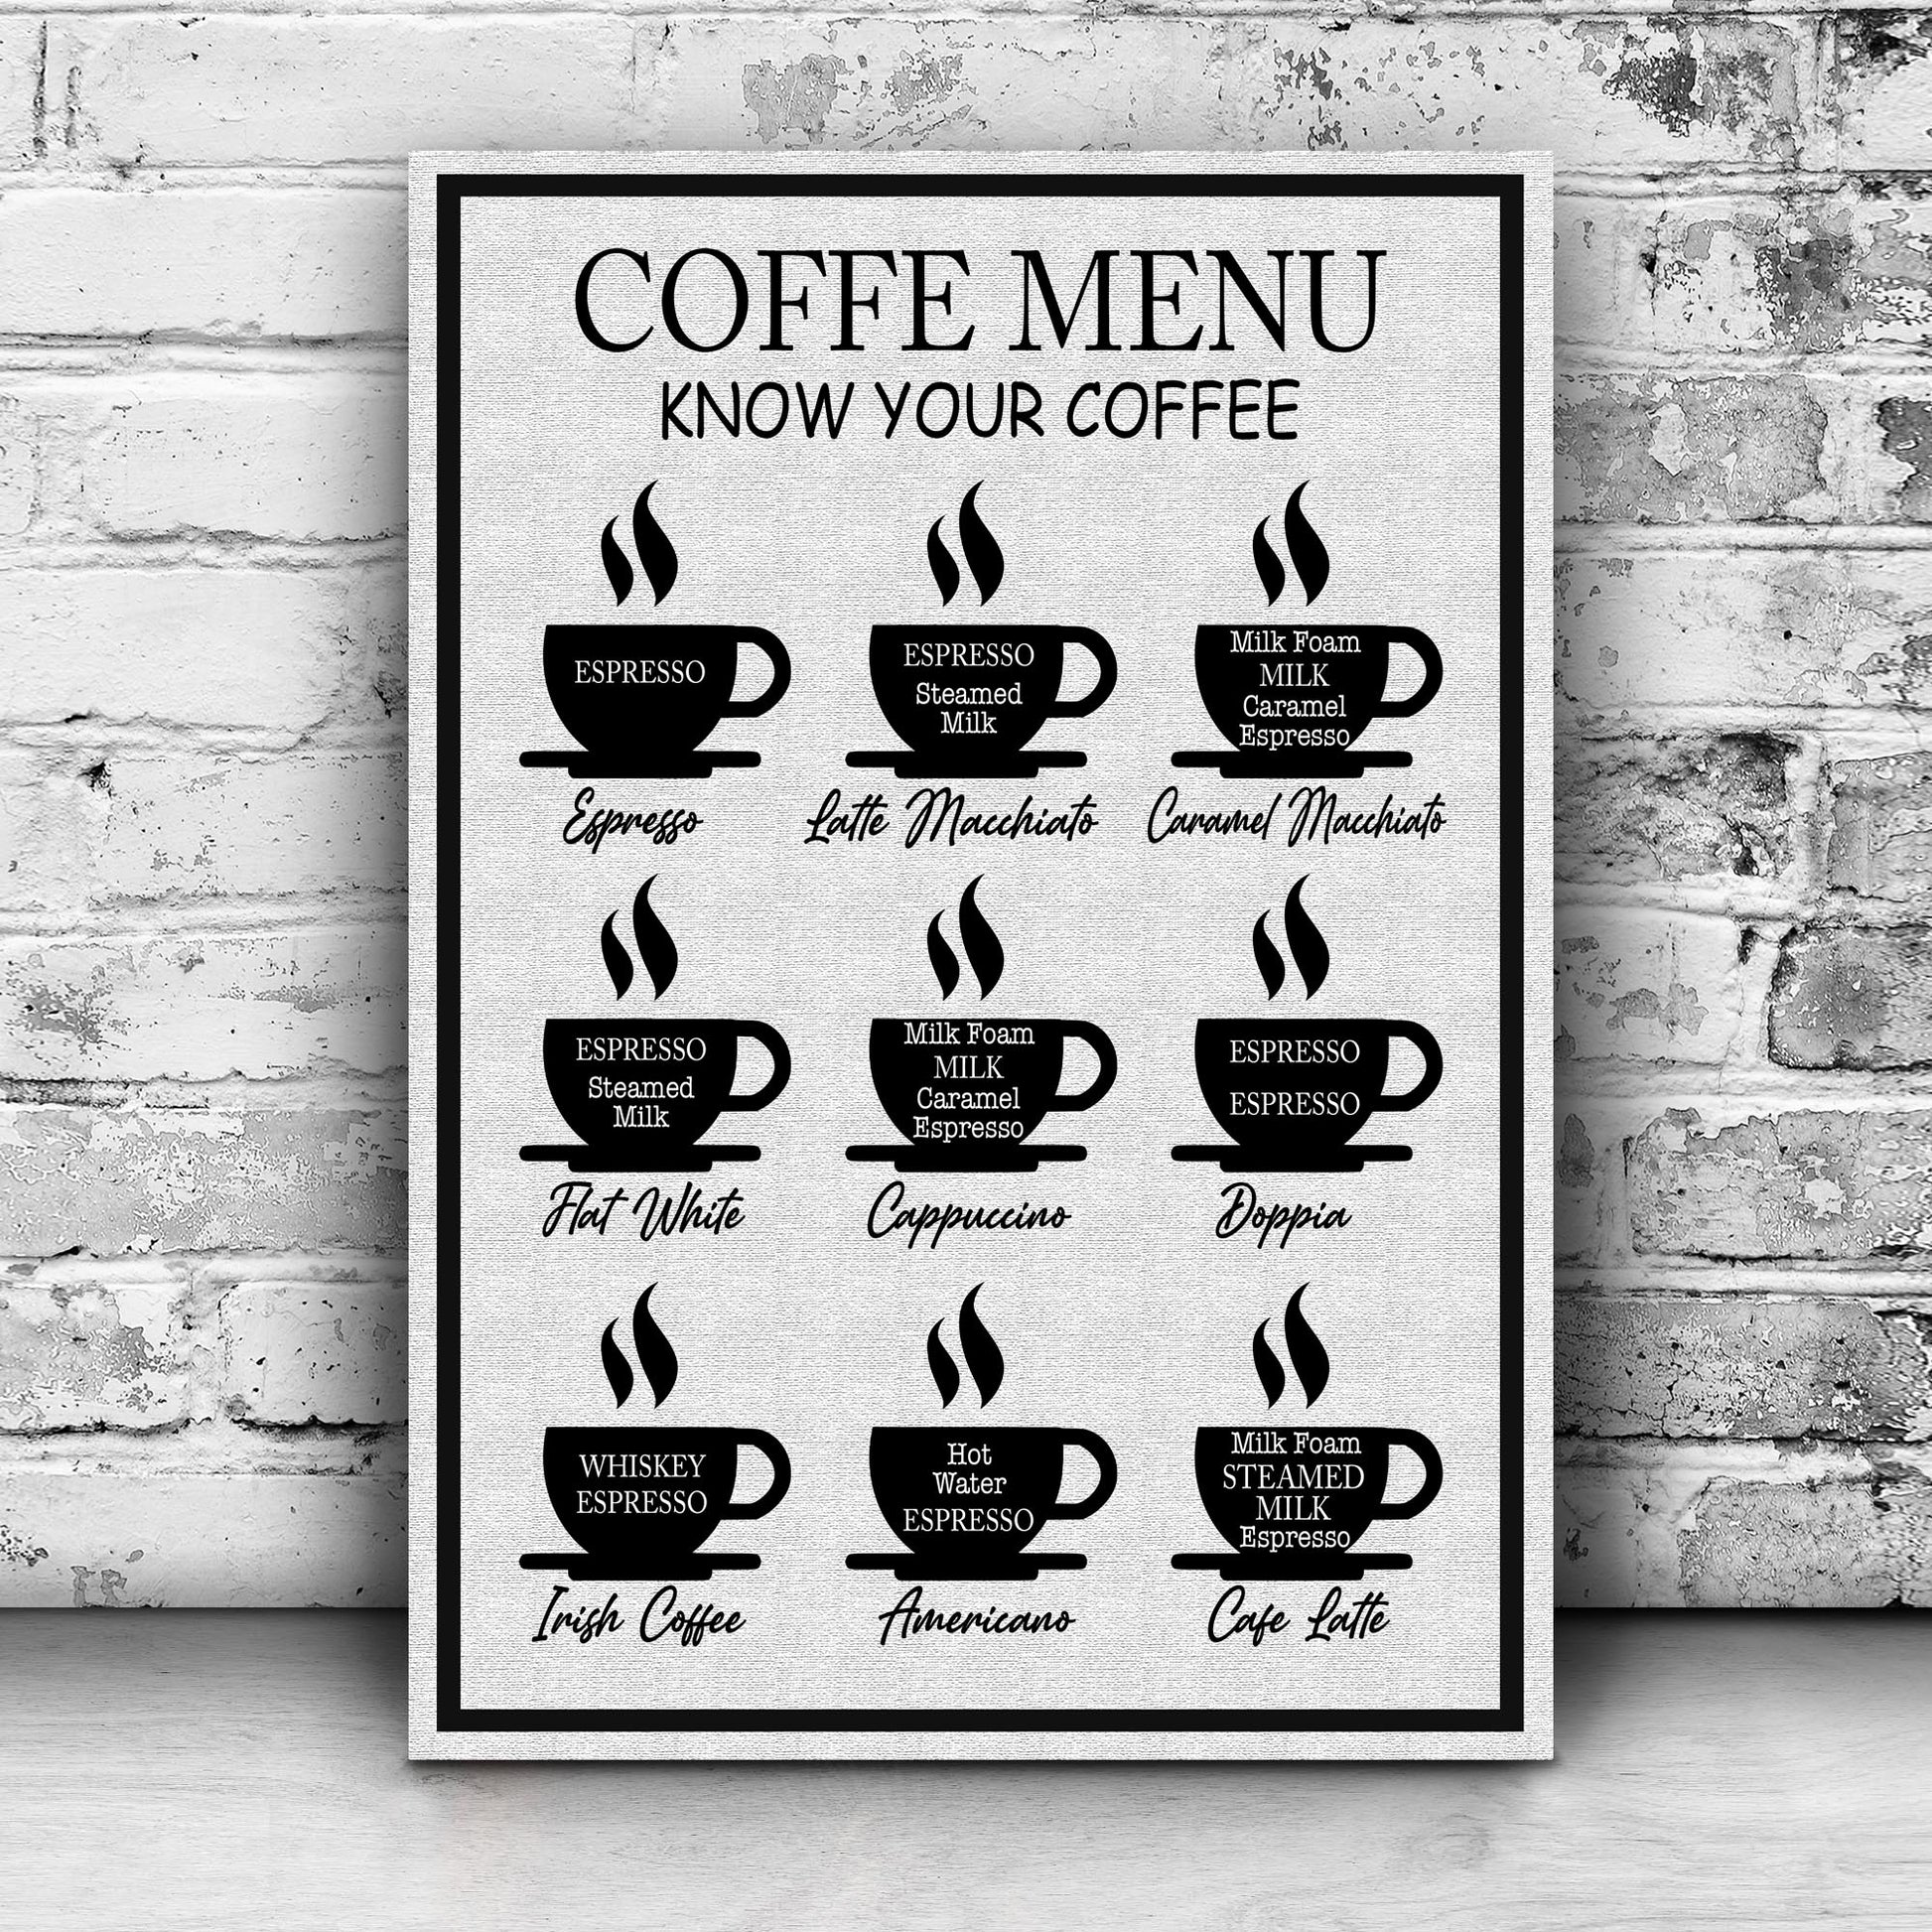 Coffee Menu Know Your Coffee Sign II - Image by Tailored Canvases